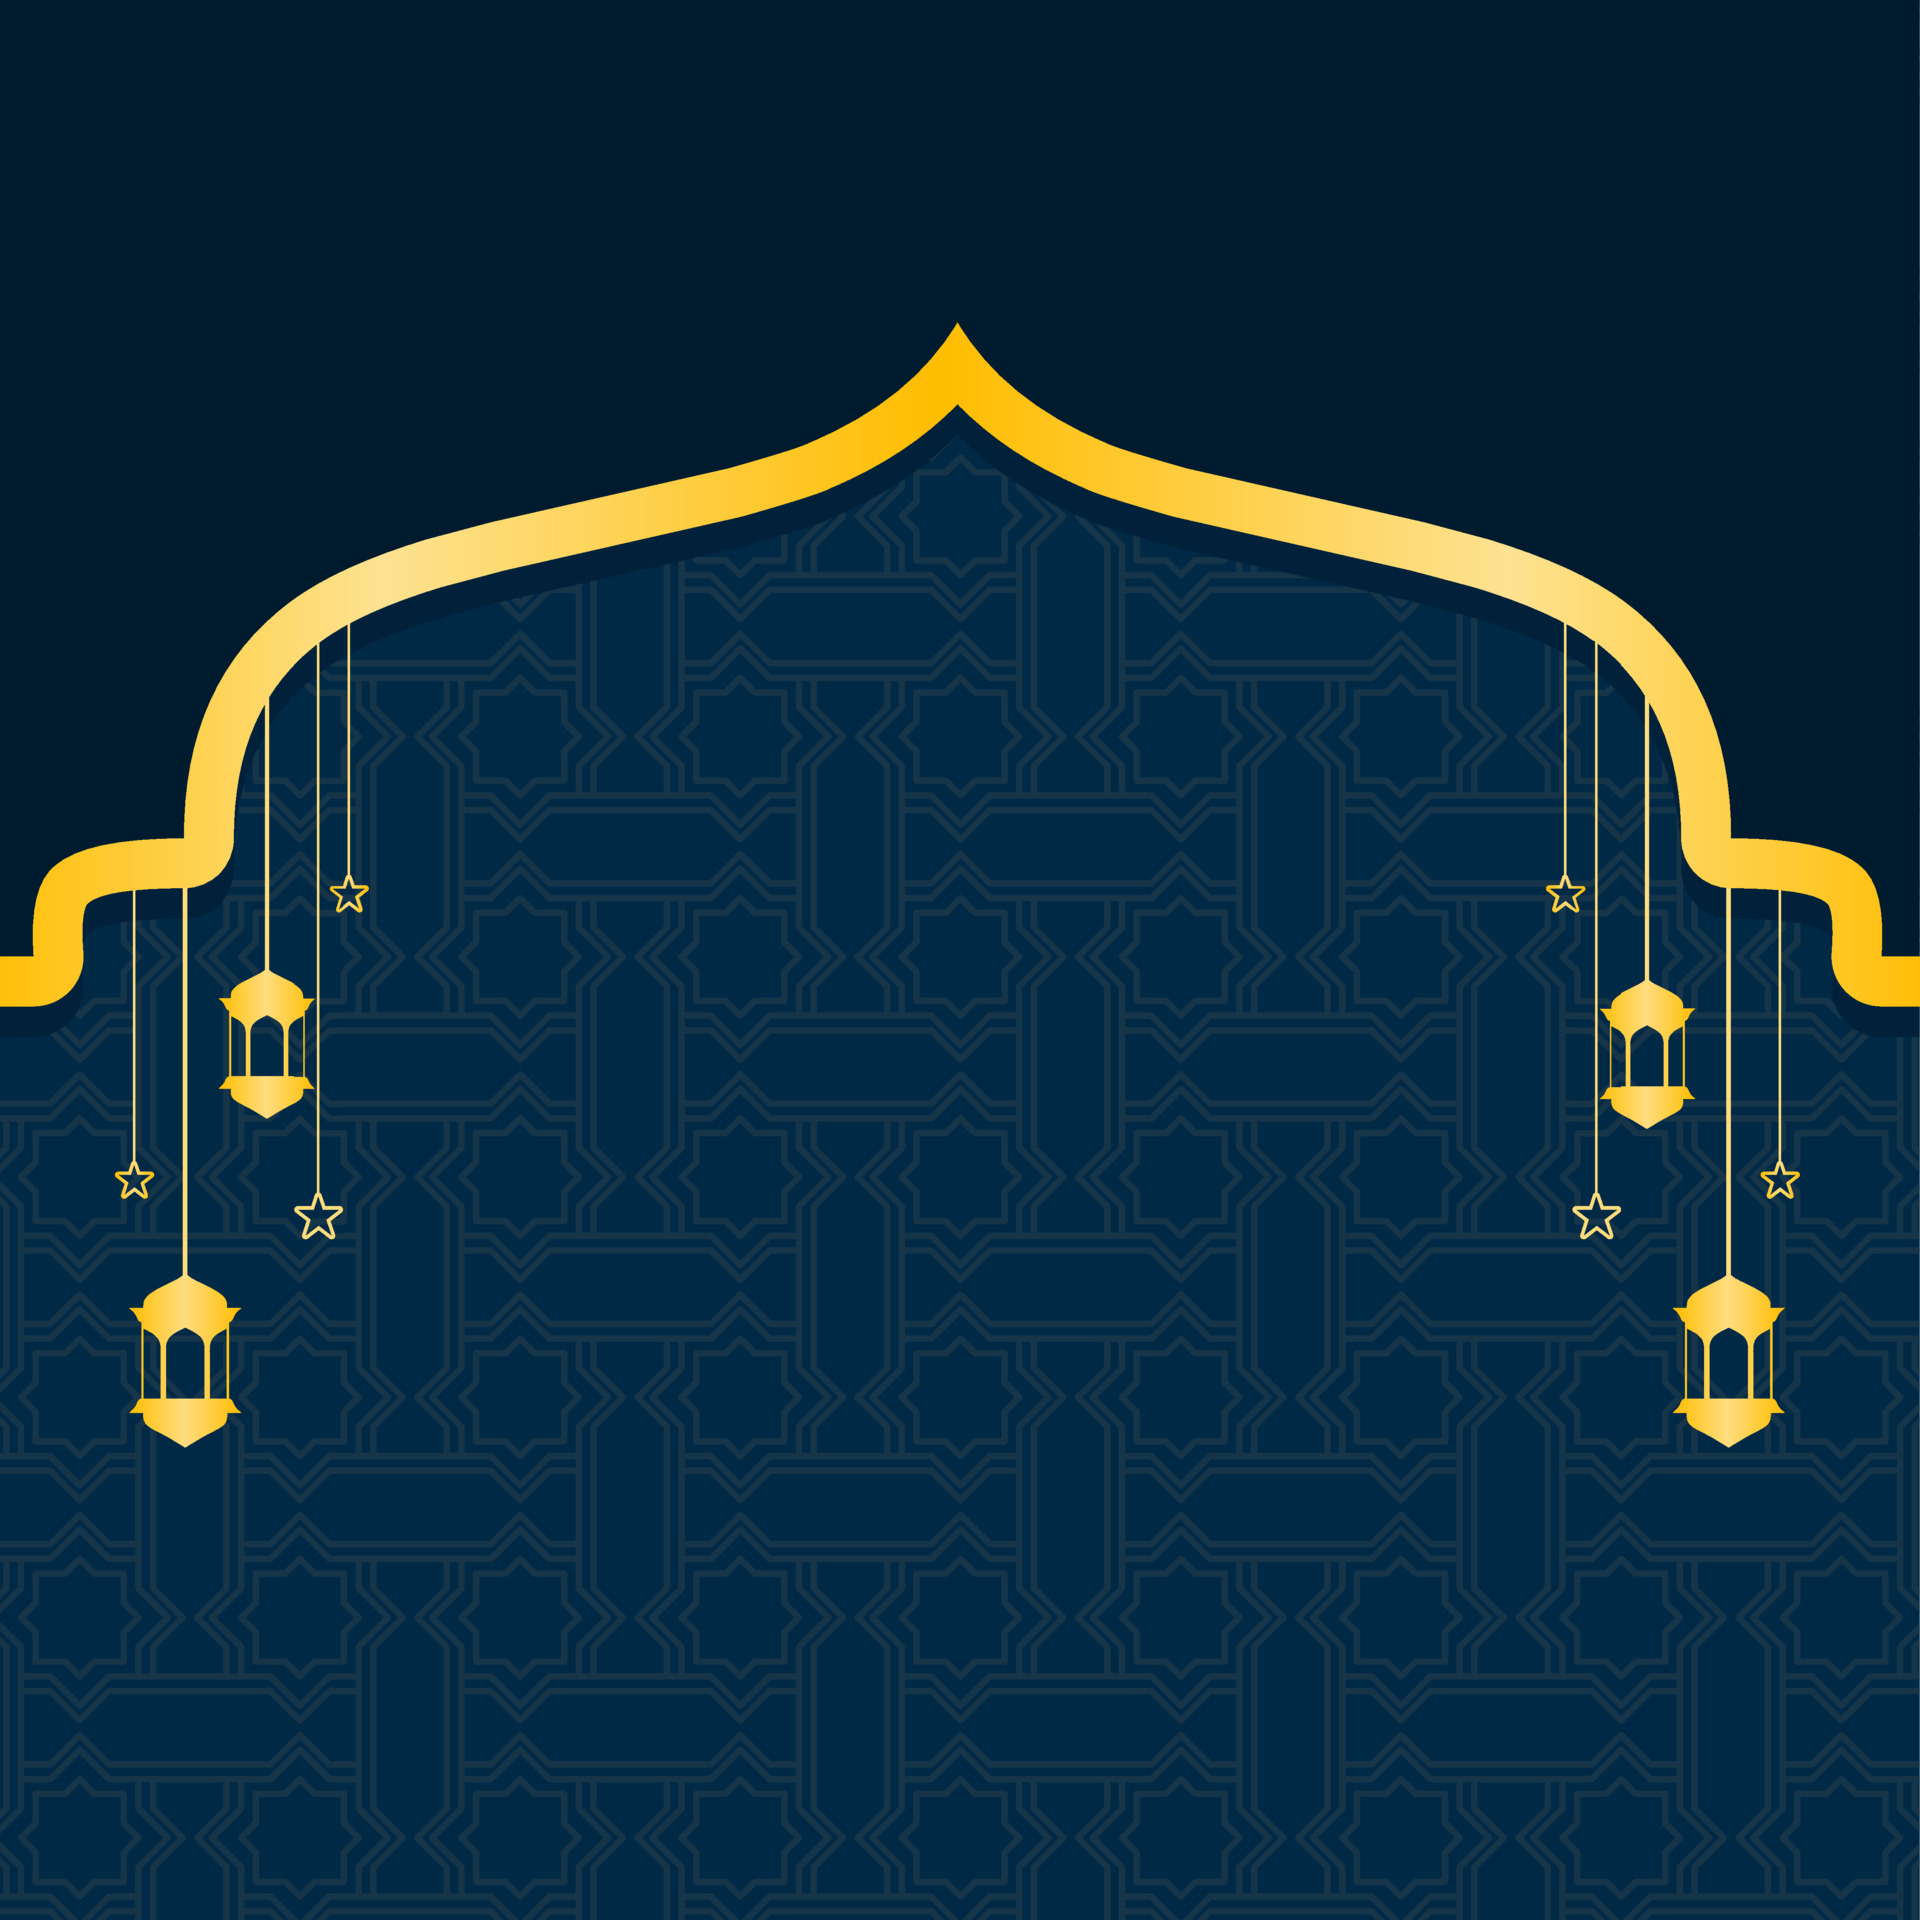 islamic background with copy space. Ramadan greeting cards, poster, invitations, wallpaper. Vector illustration